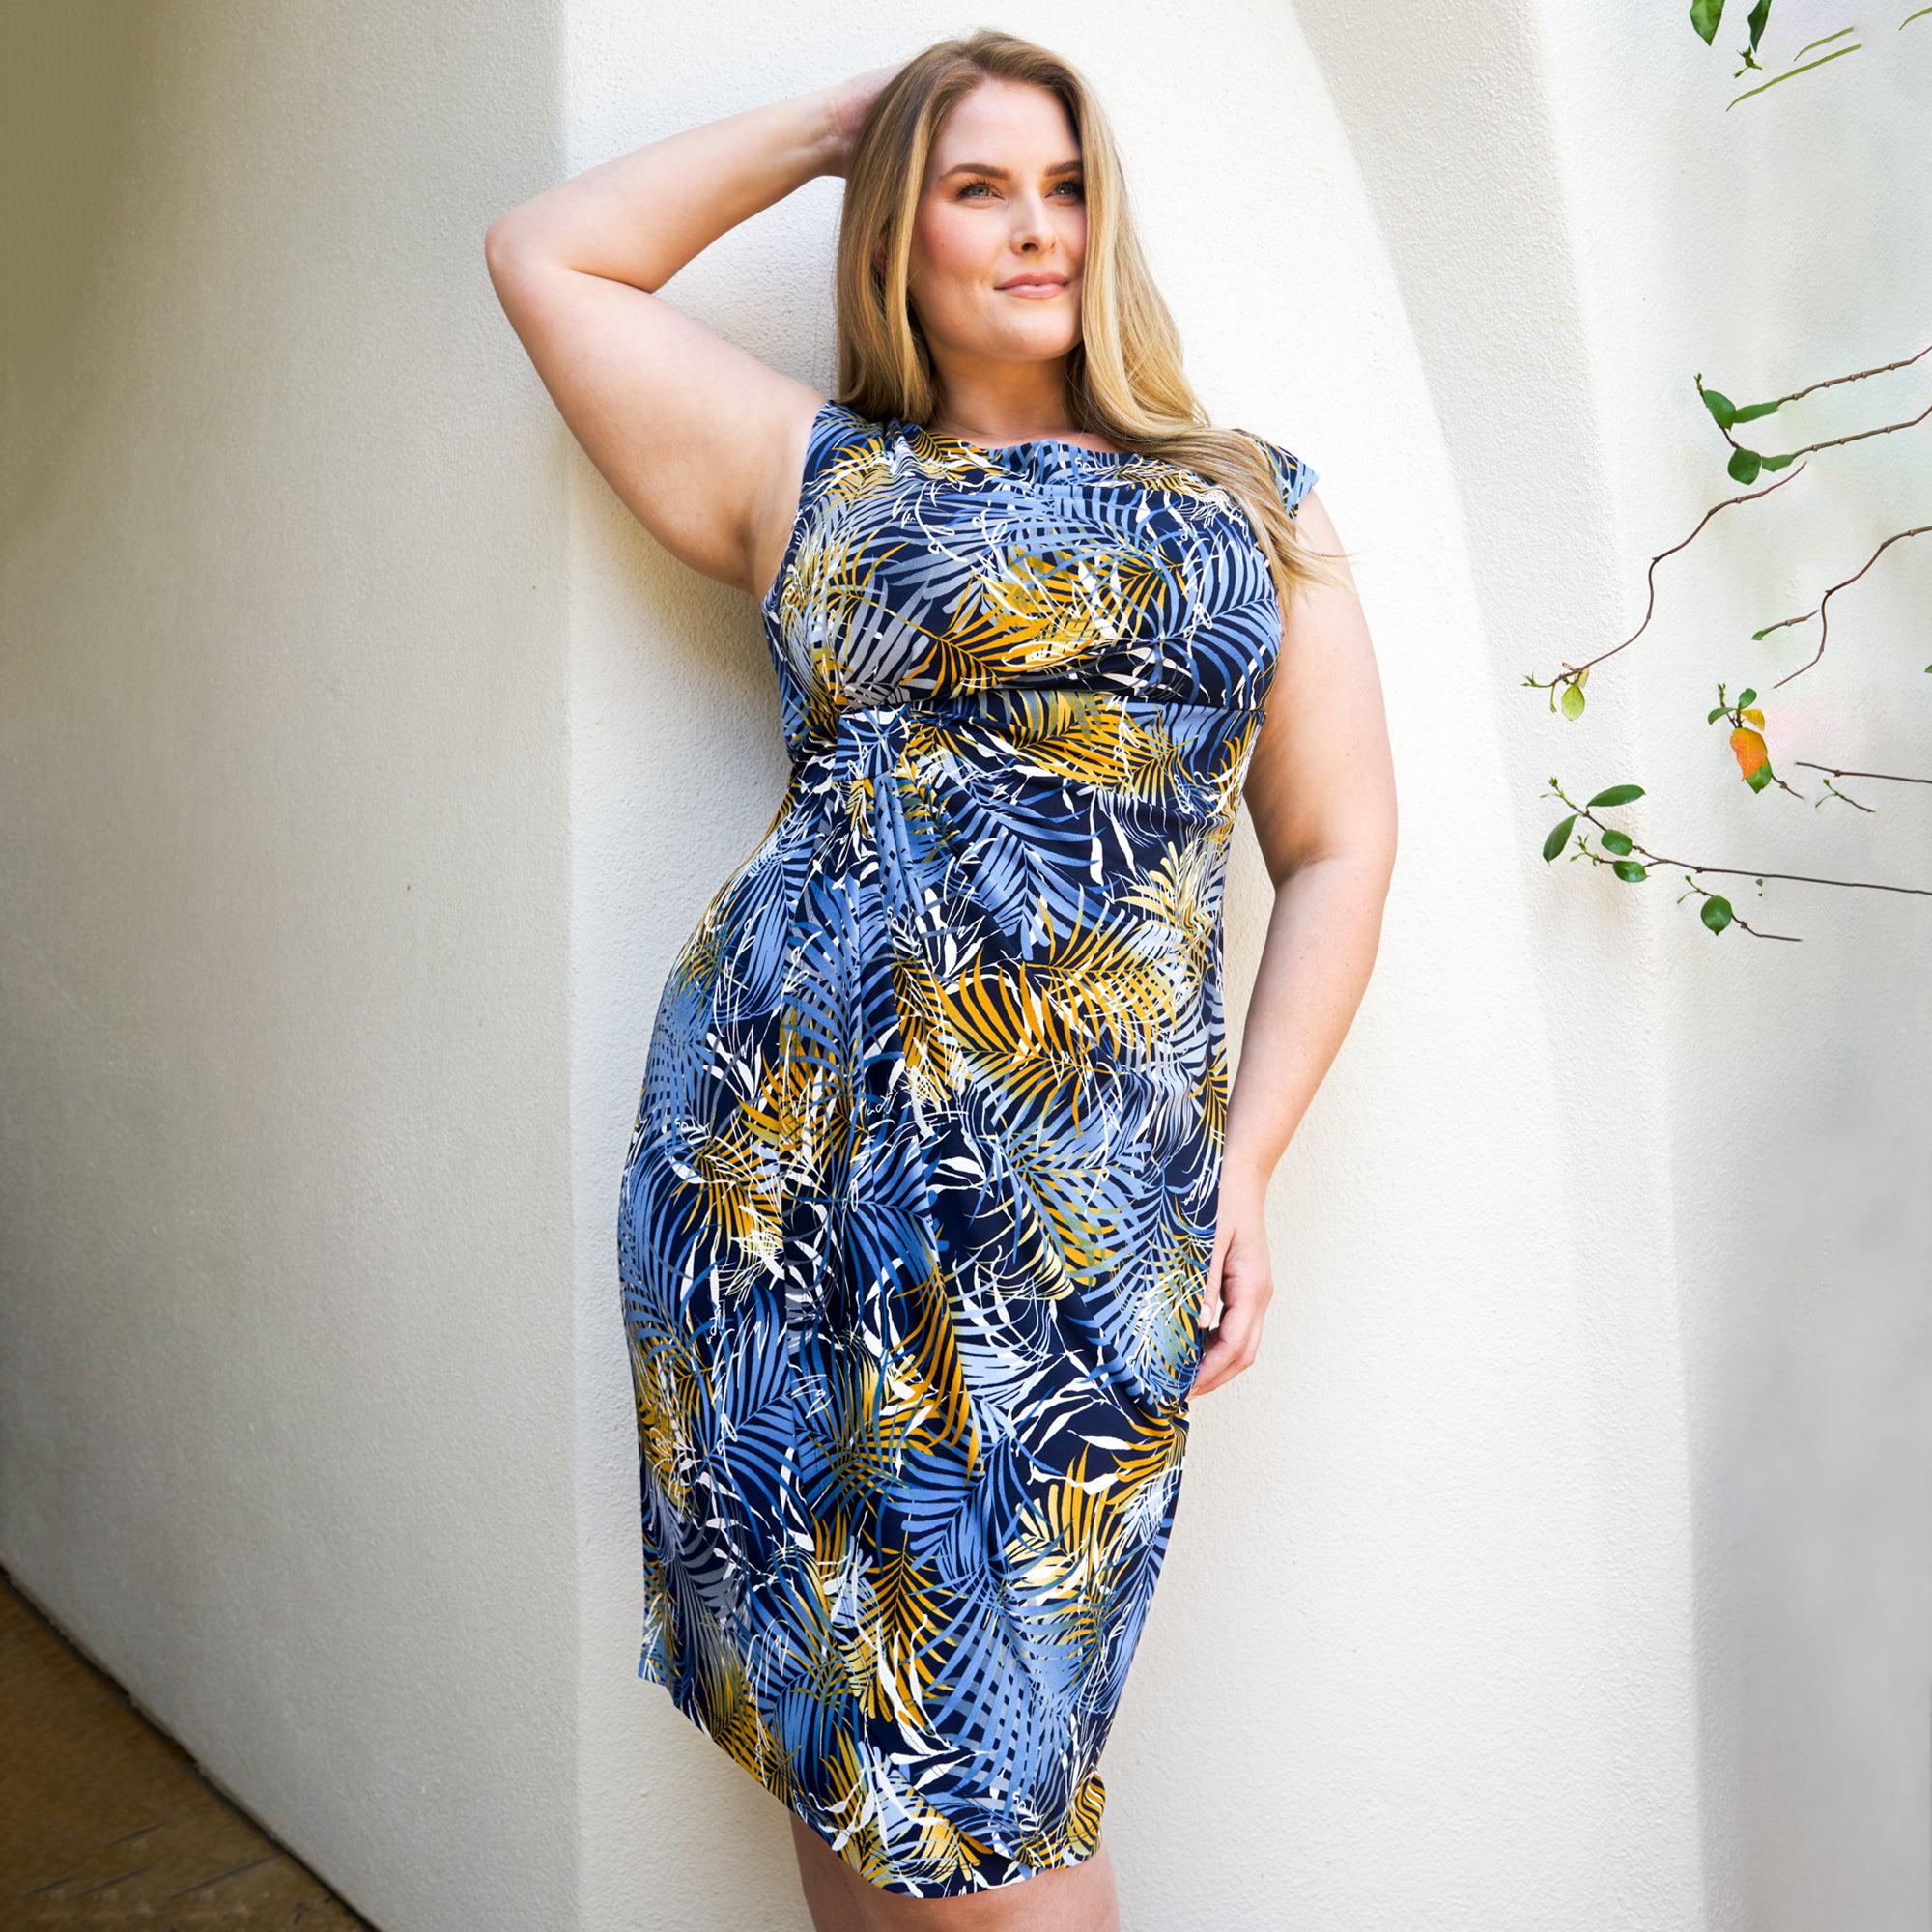 Woman posing wearing Navy/Mustard Lisa Palm Print Faux Wrap Dress from Connected Apparel